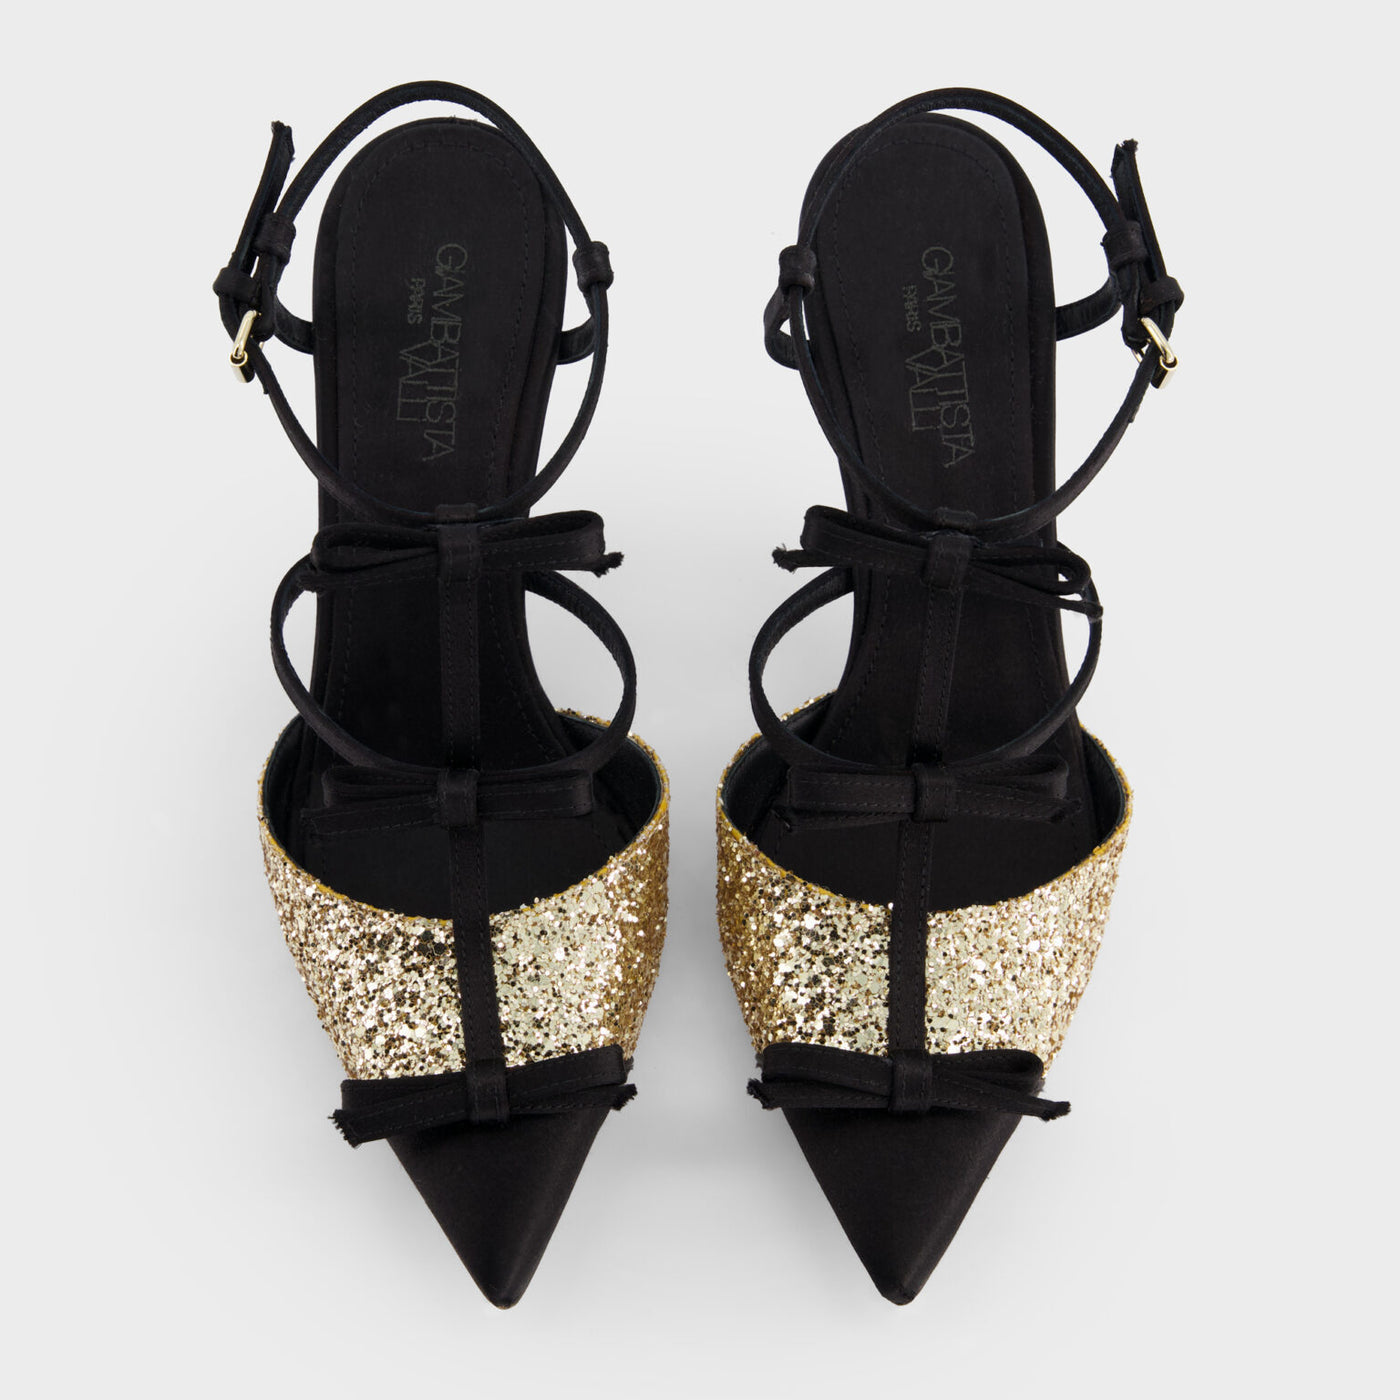 SEQUINS AND SATIN BOW PUMPS 75mm - Black/Gold